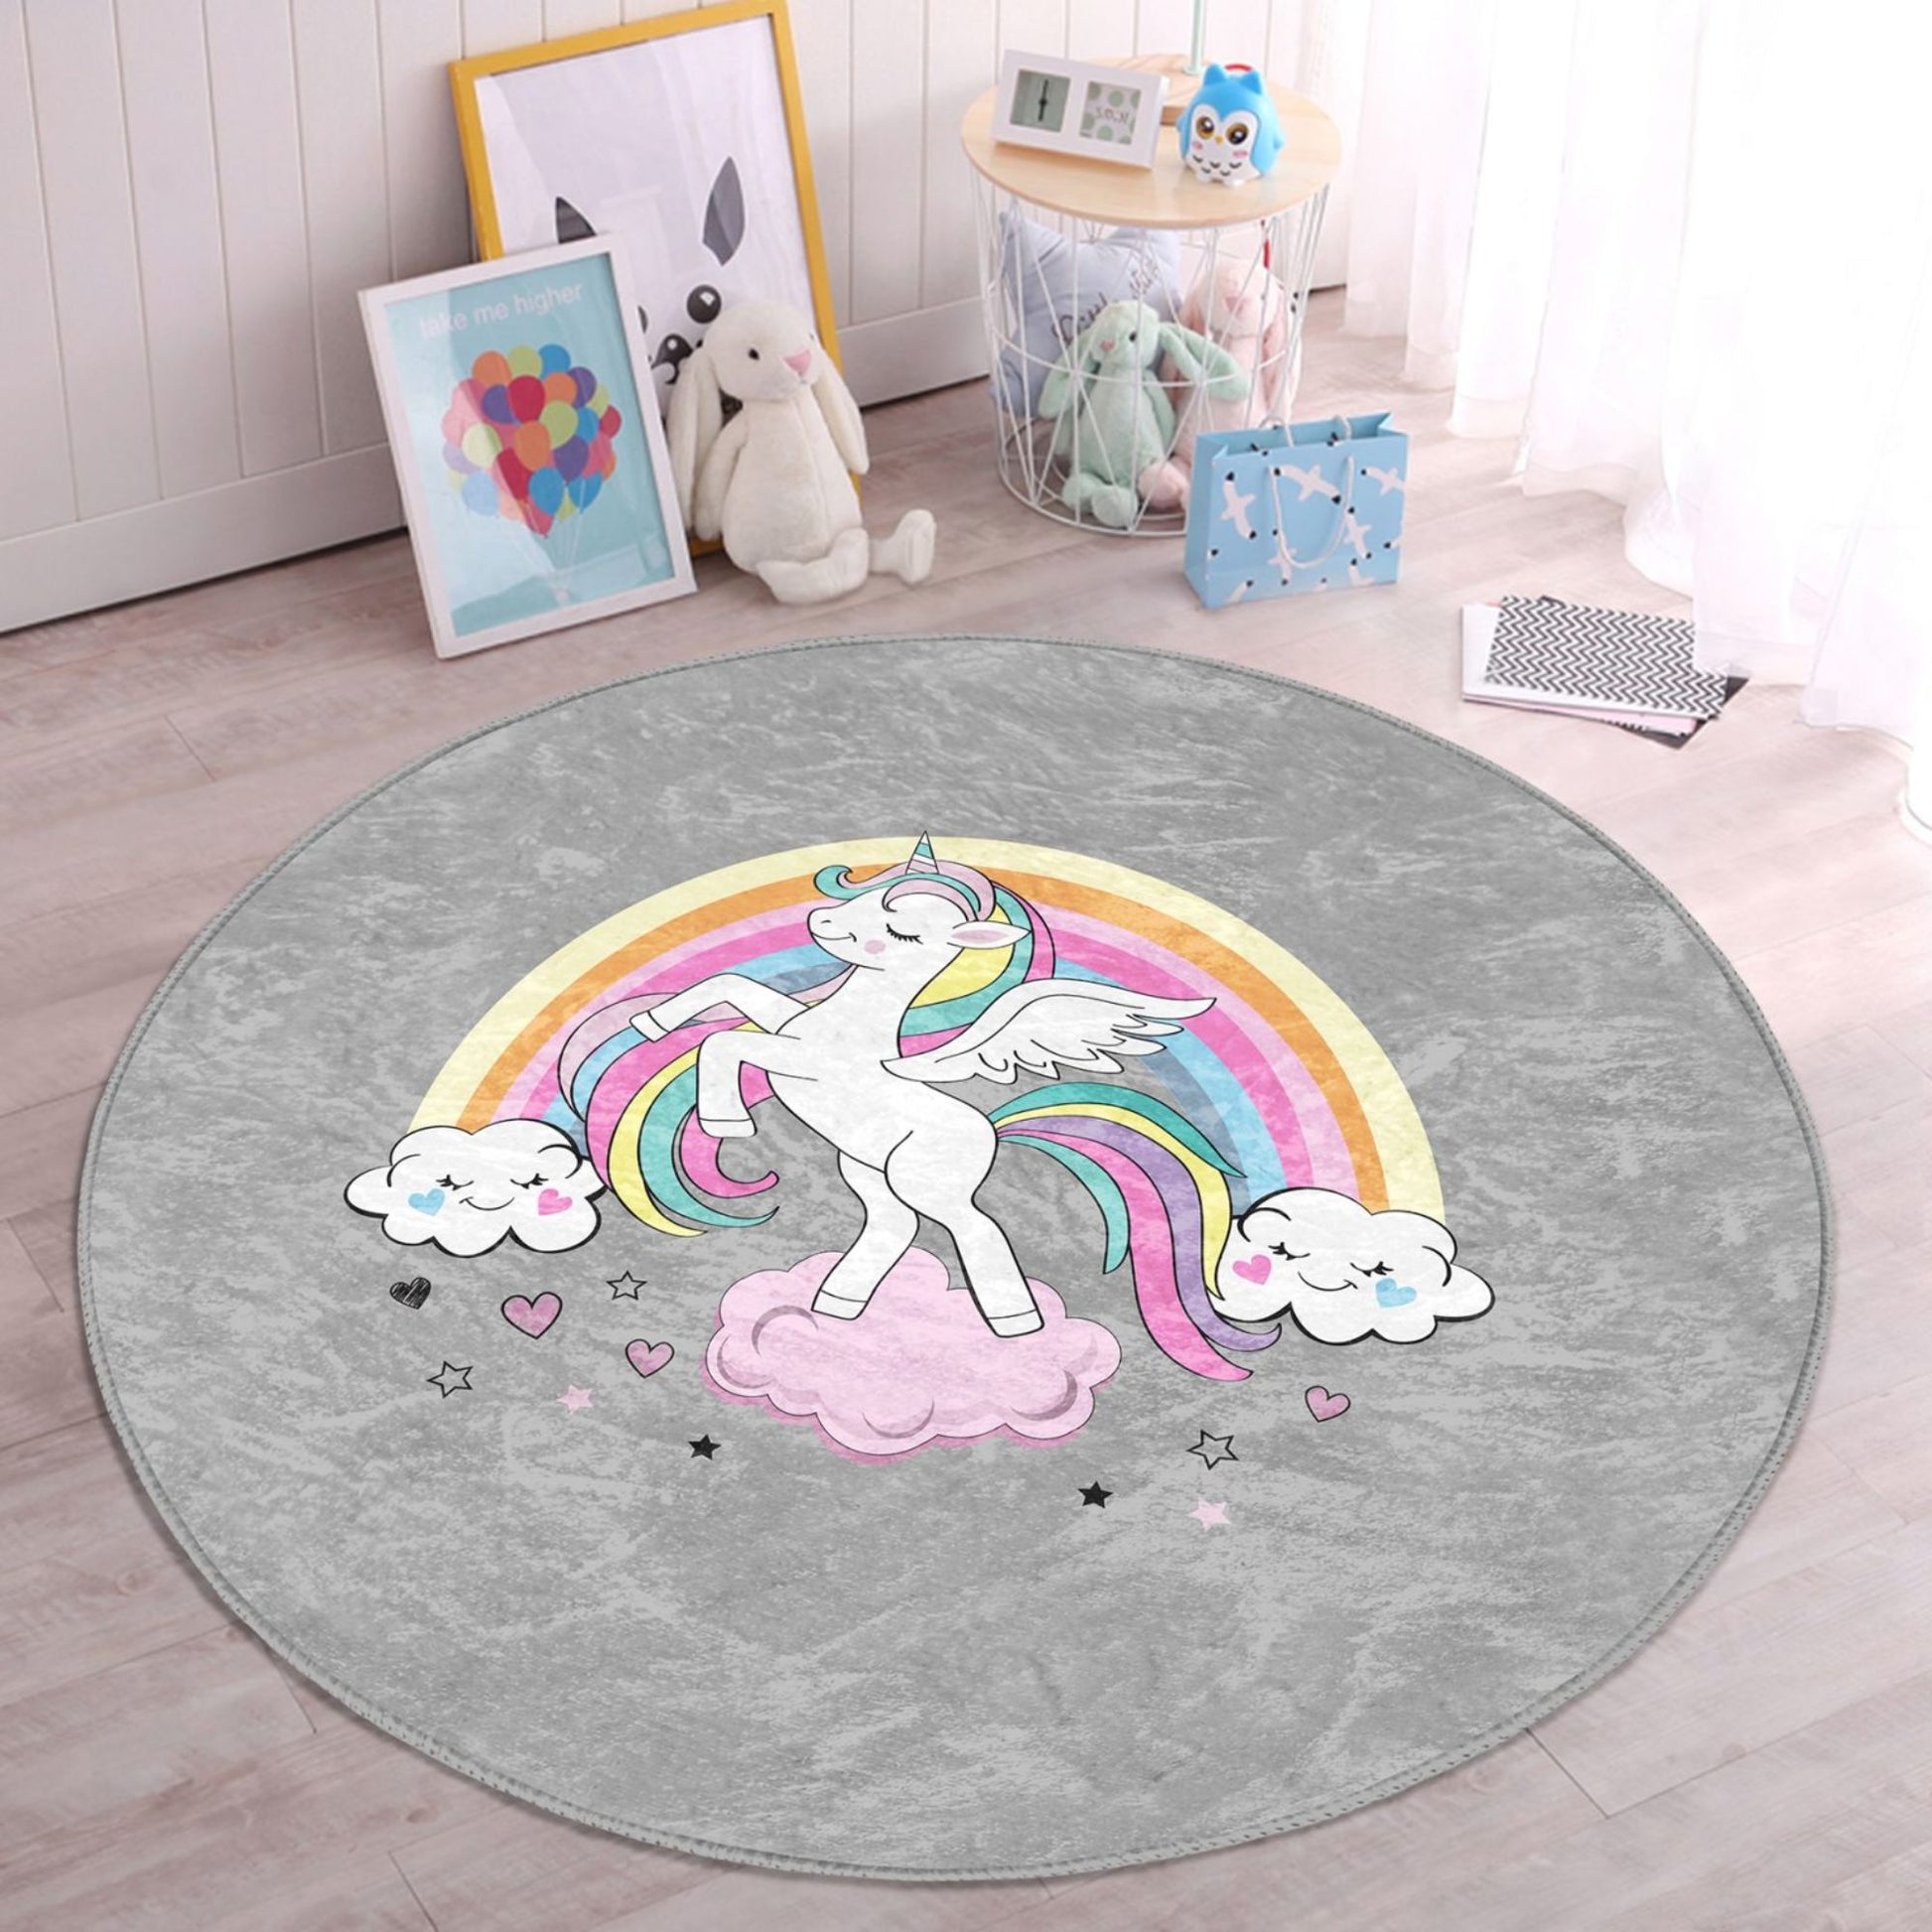 Rug with Magical Unicorn Theme for Kids Play Area